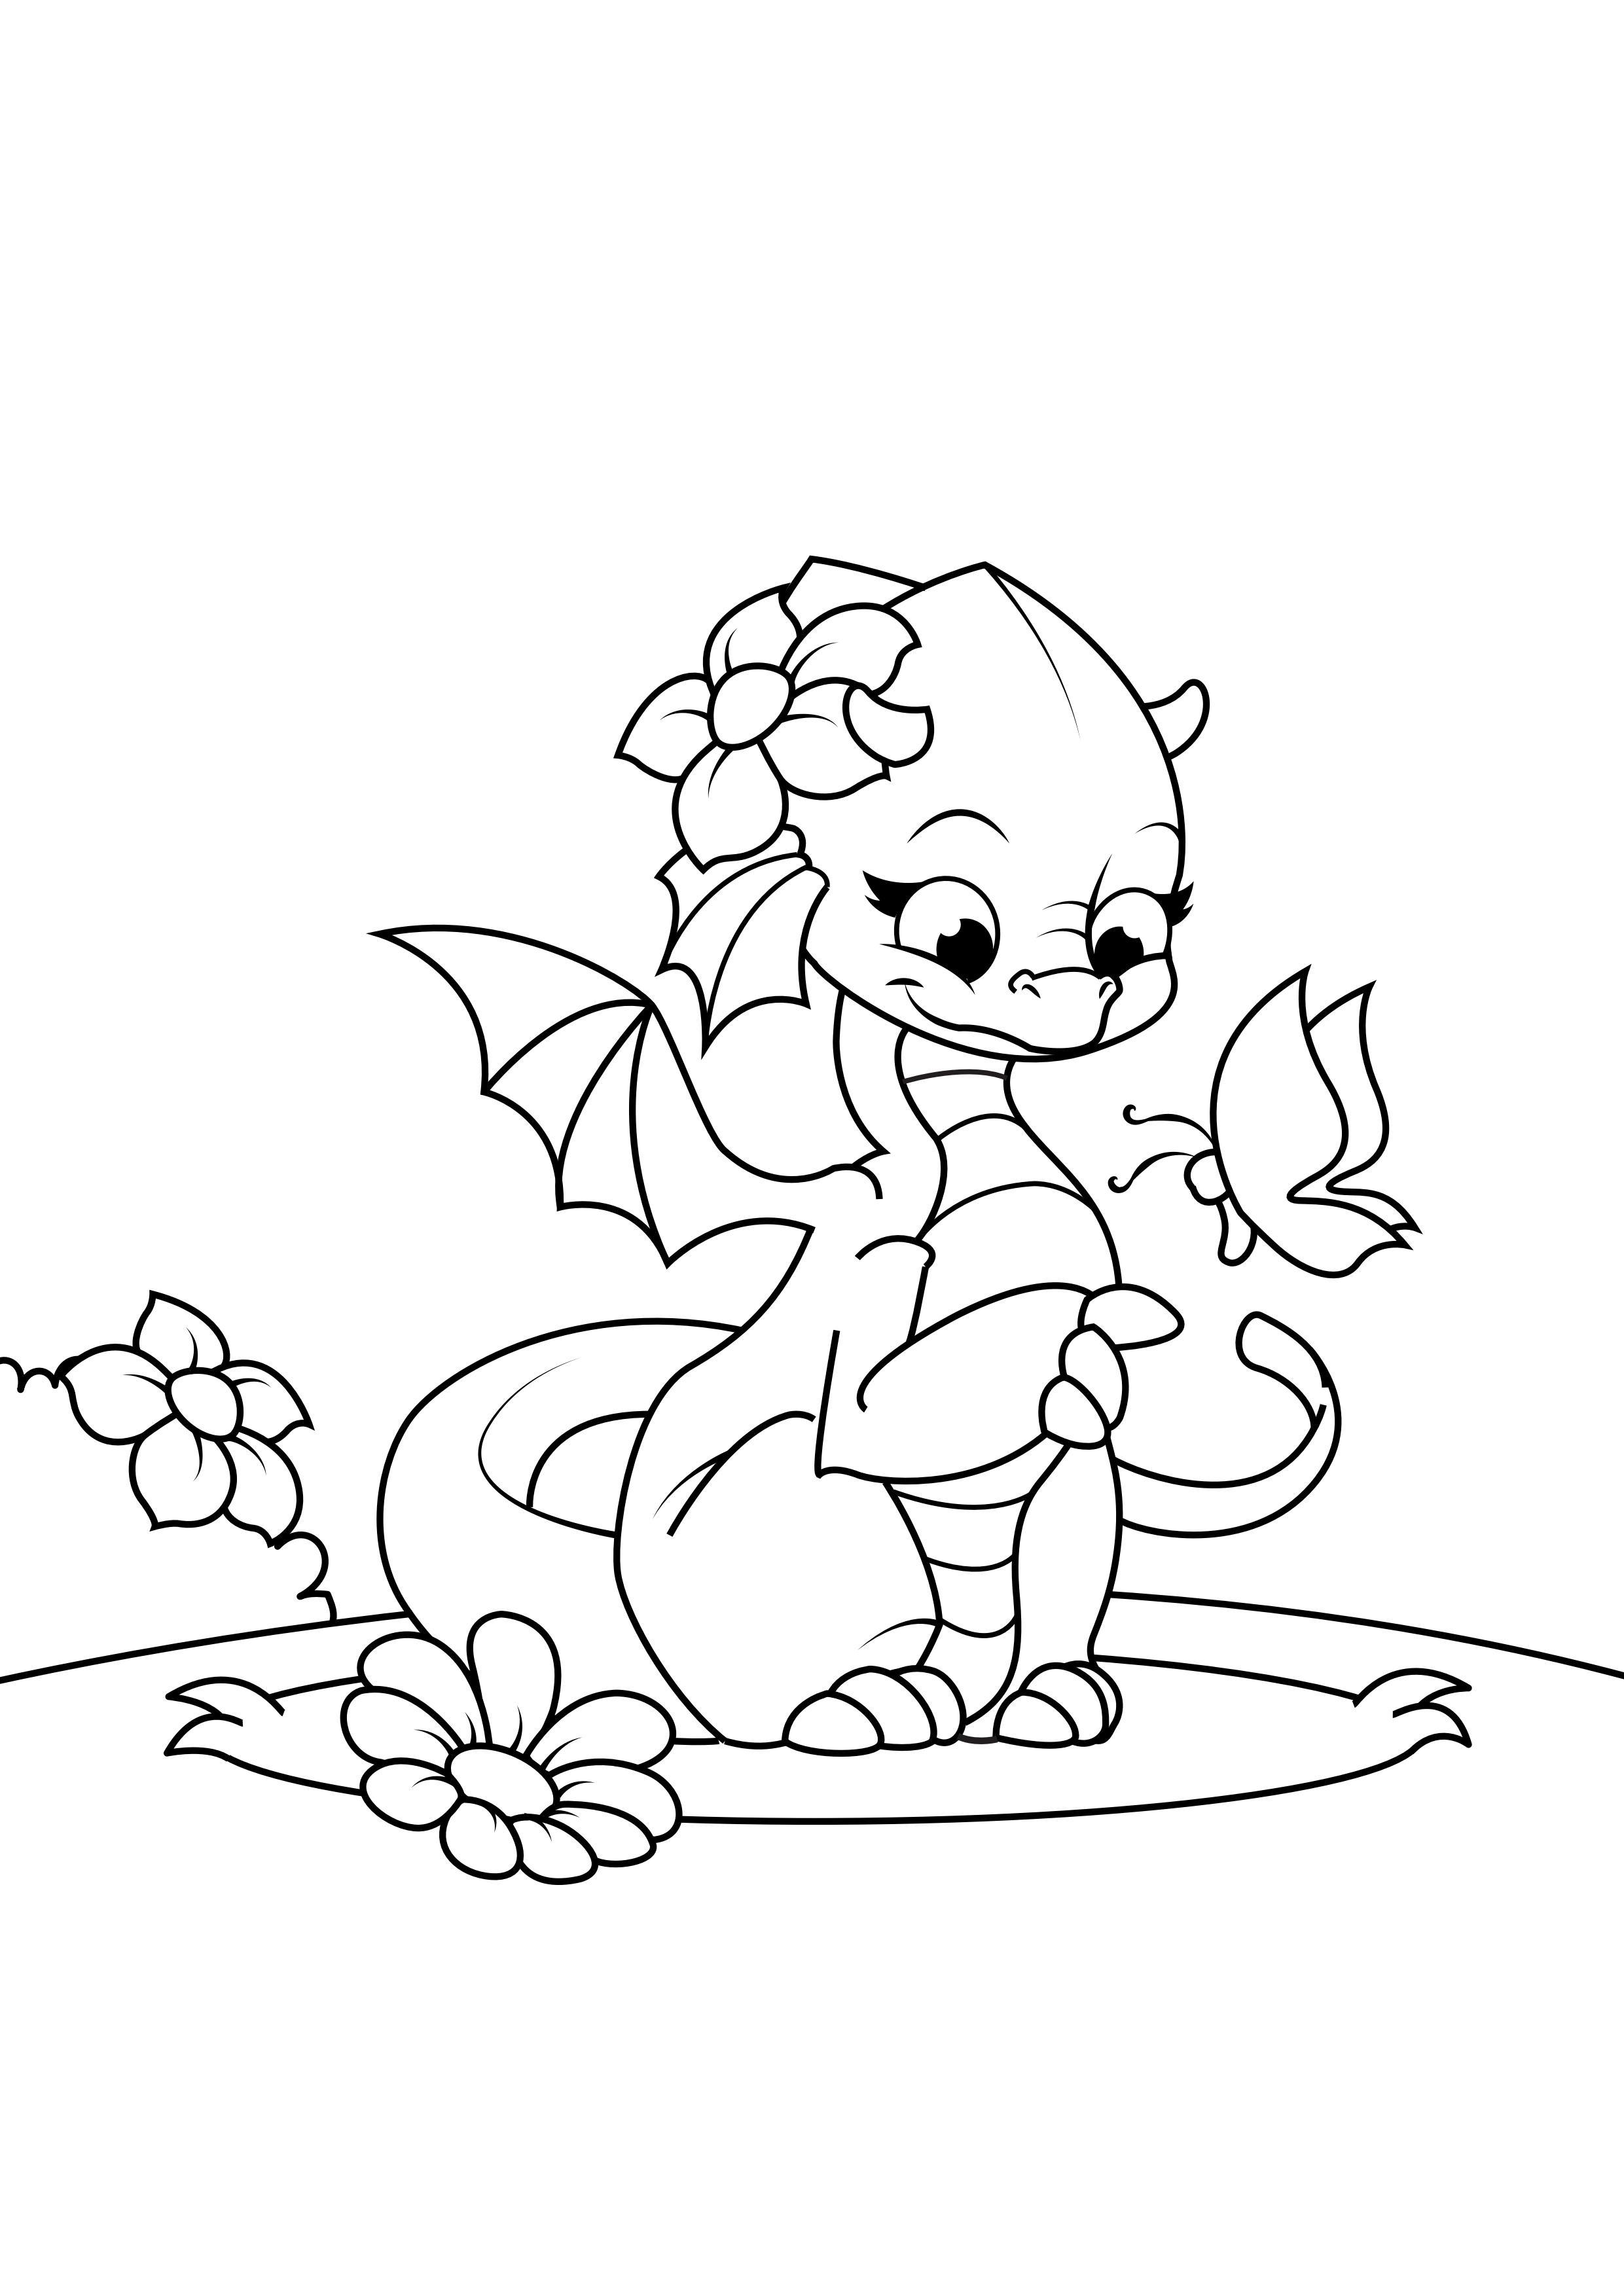 Tails Sketch  Cartoon coloring pages, Drawings, Dragon sketch